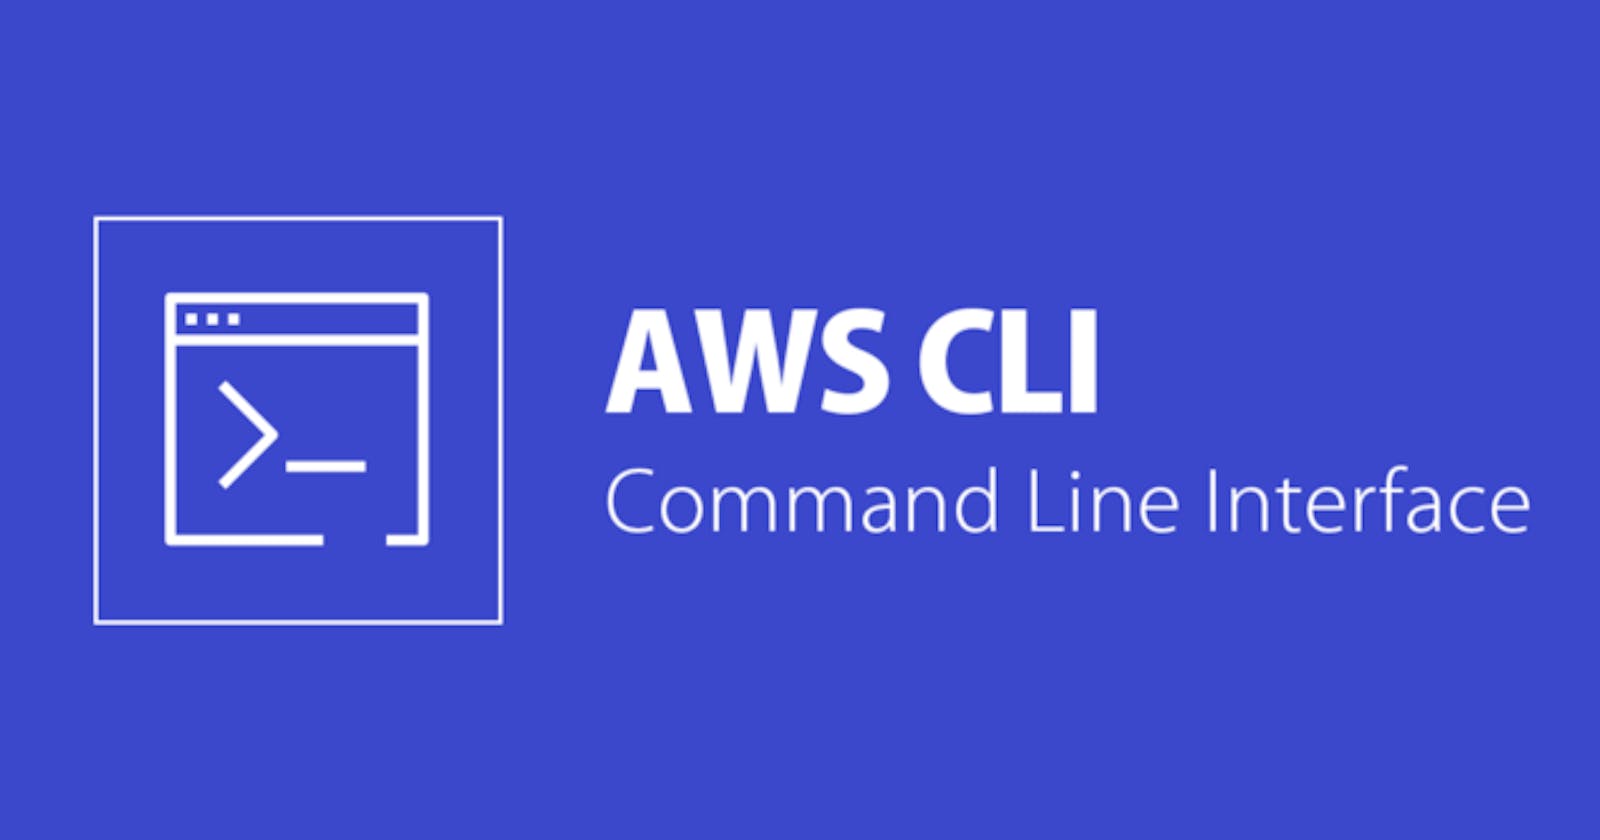 Installing AWS CLI on Linux